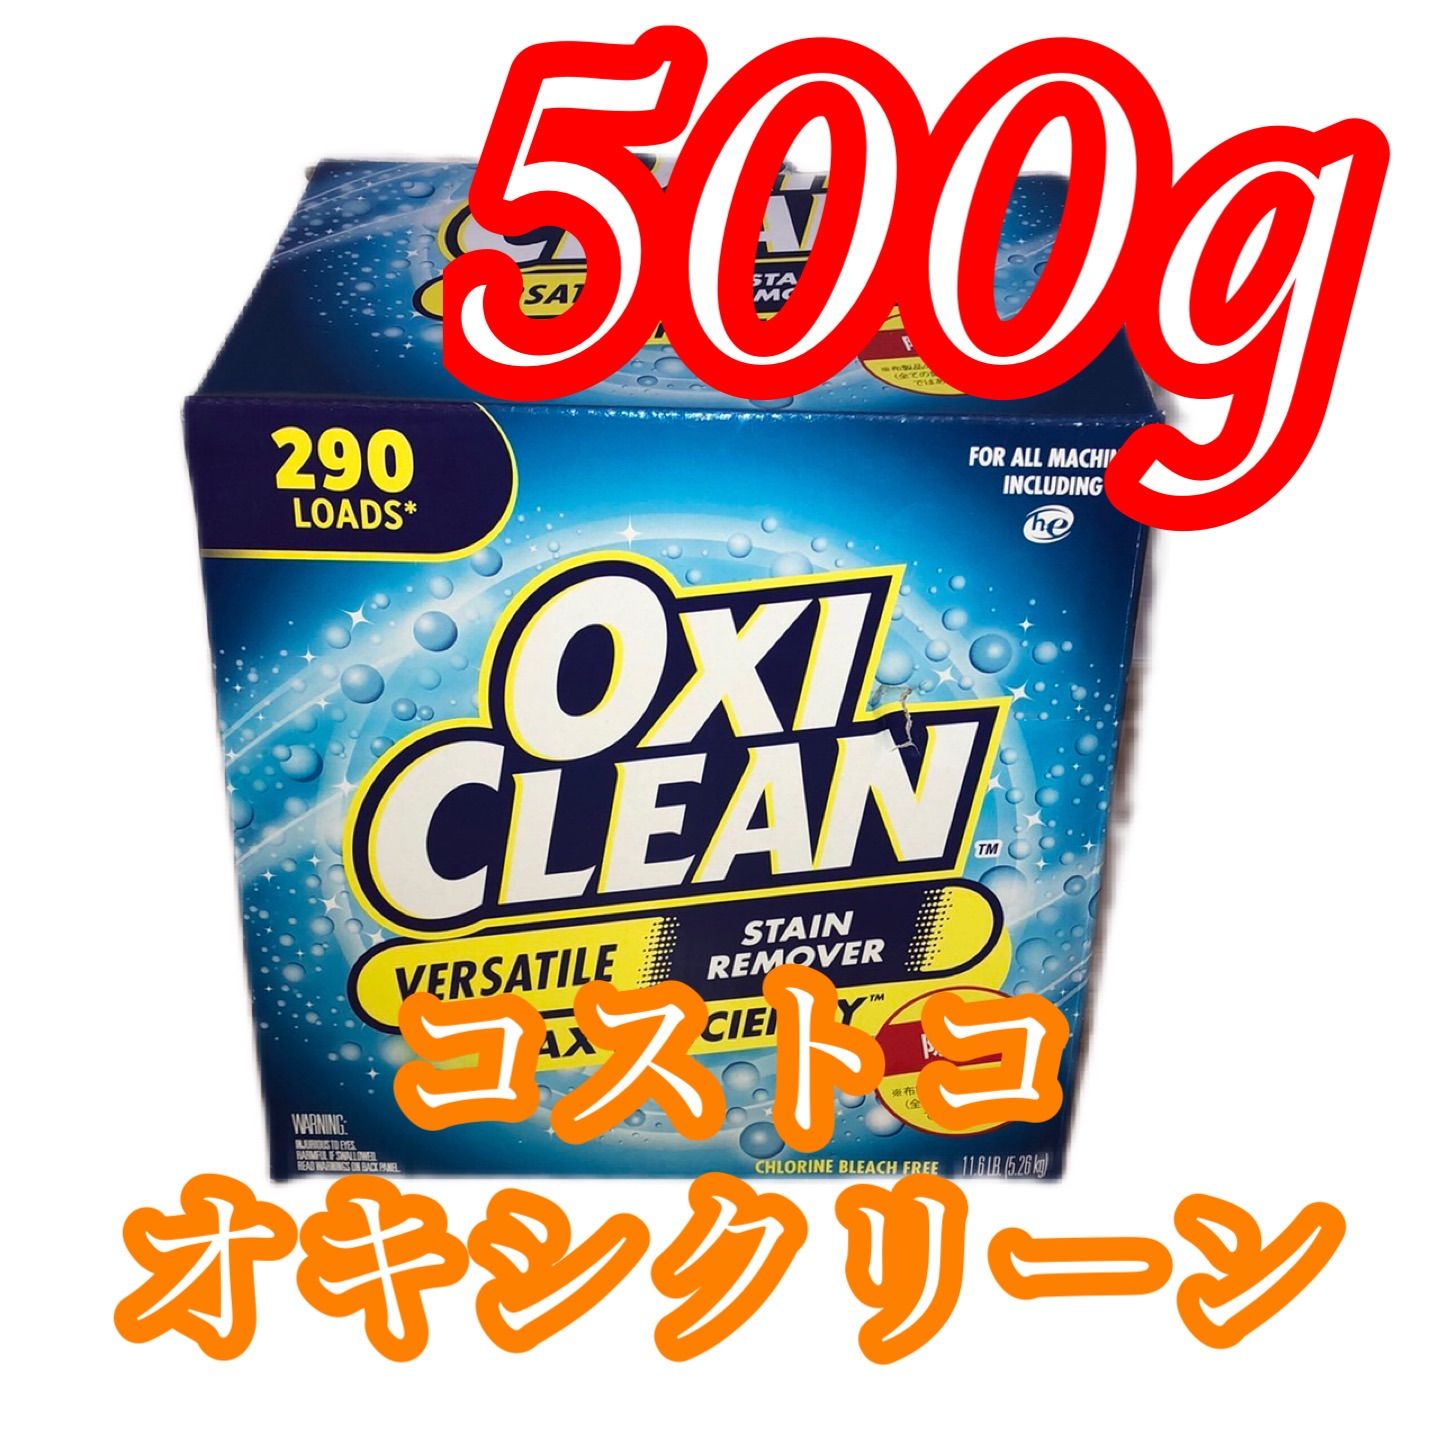 Oxi Clean Versatile Stain Remover, 10.1 lbs